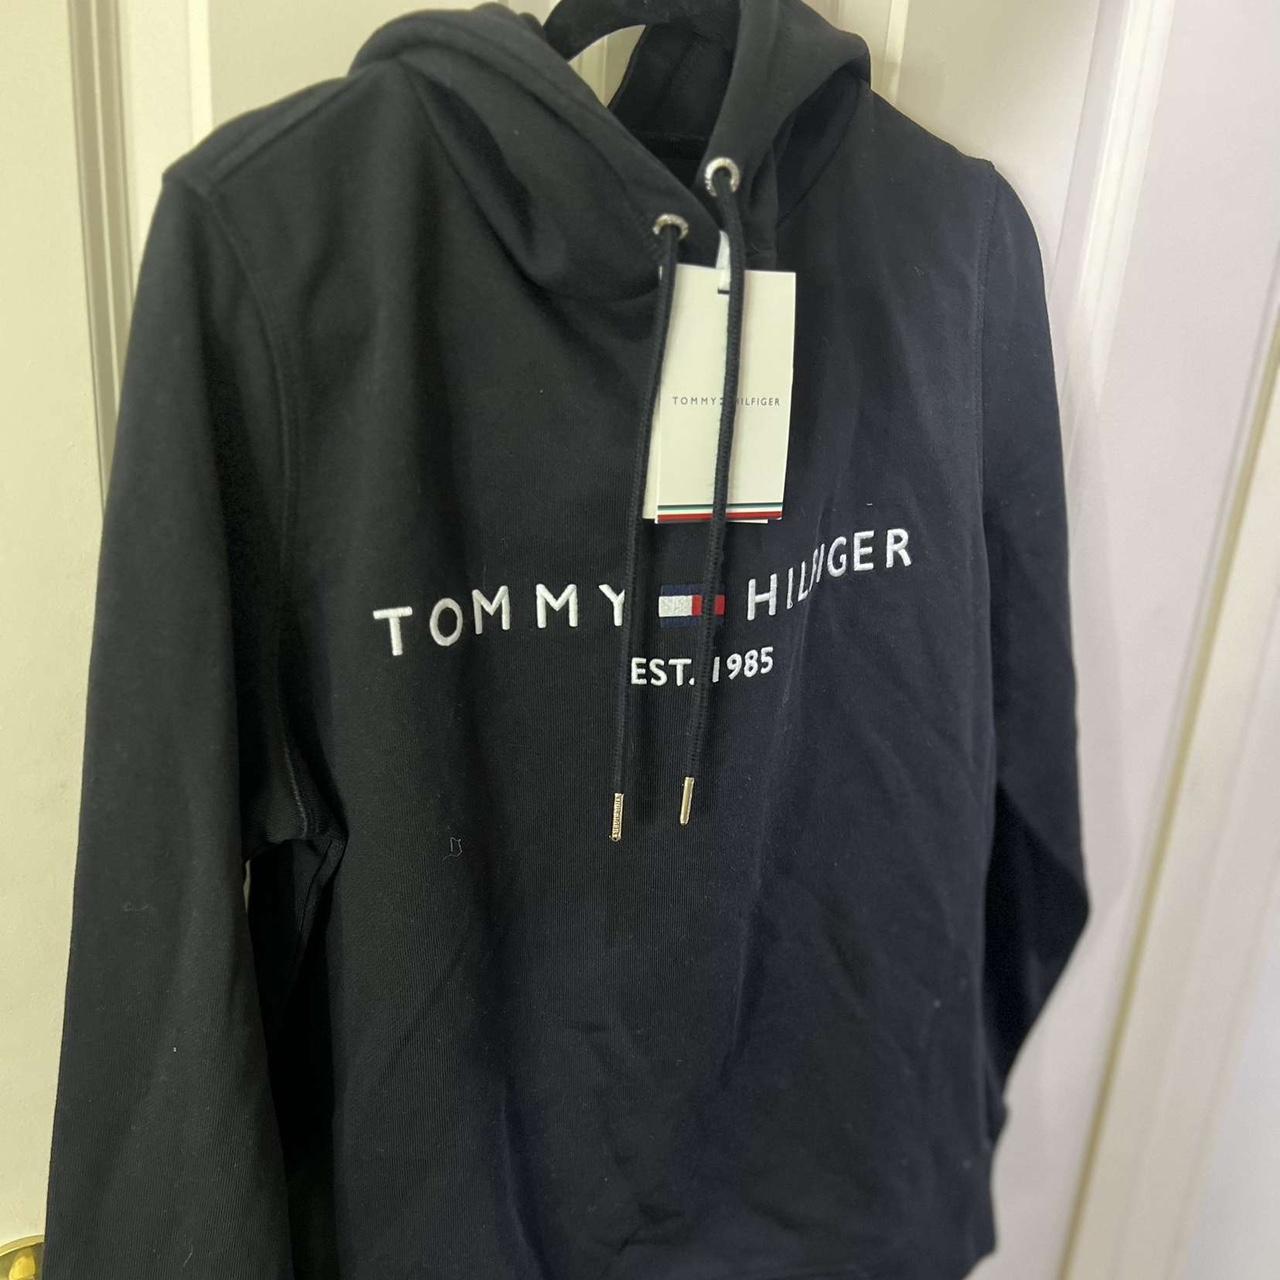 Tommy hilfiger hoodie brand new with tags Size small - Depop